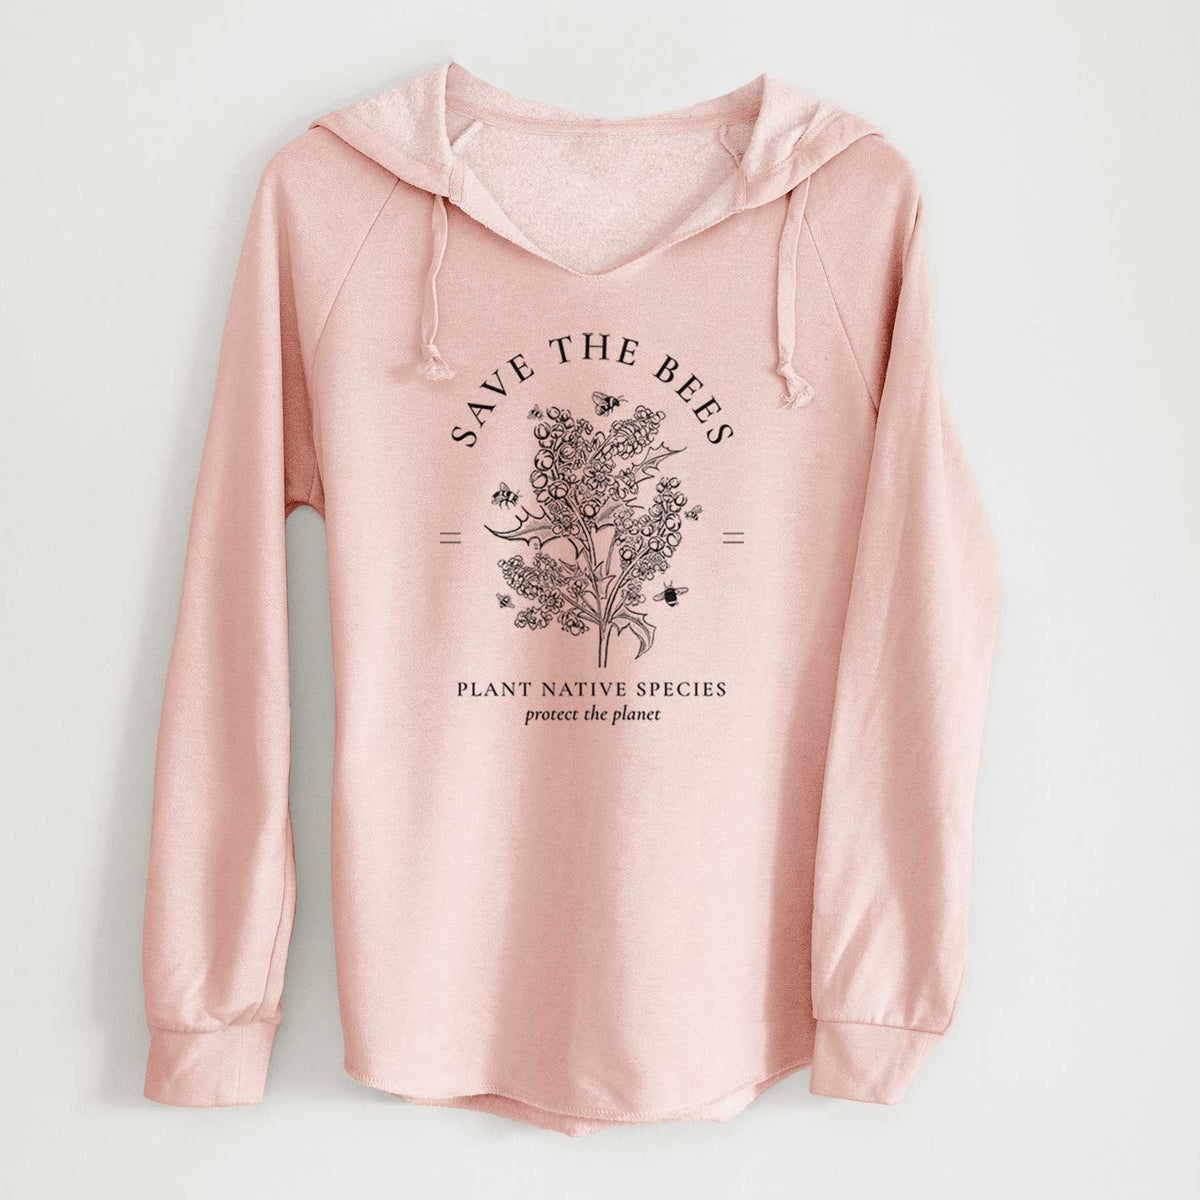 Save the Bees - Plant Native Species - Cali Wave Hooded Sweatshirt